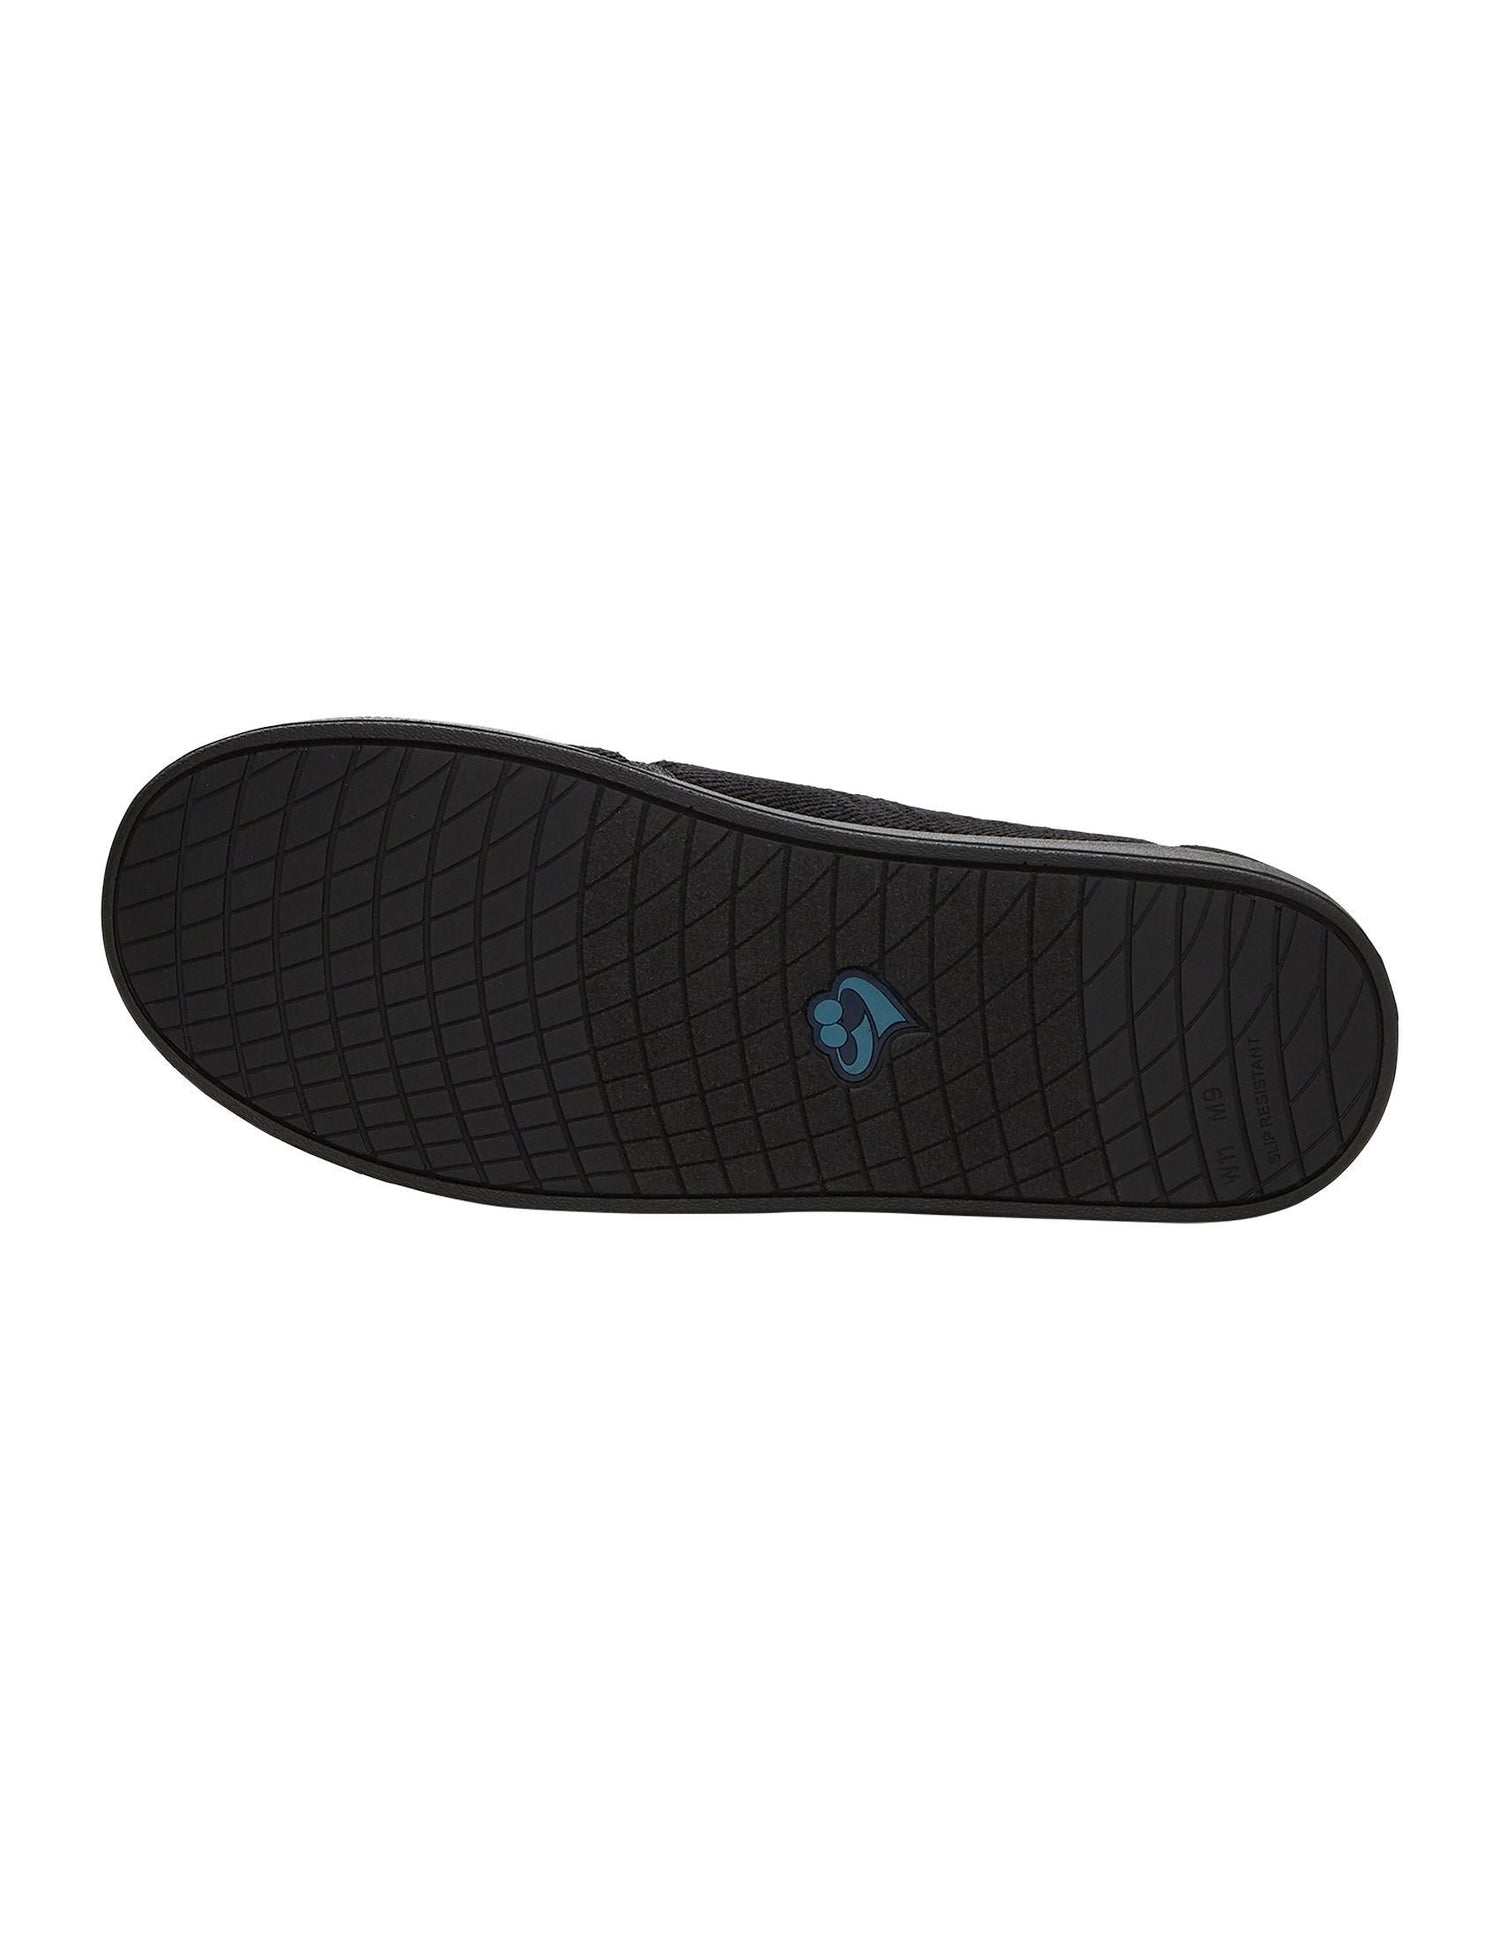 Bottom of wide indoor black slippers with non-slip black soles and removable memory foam insoles